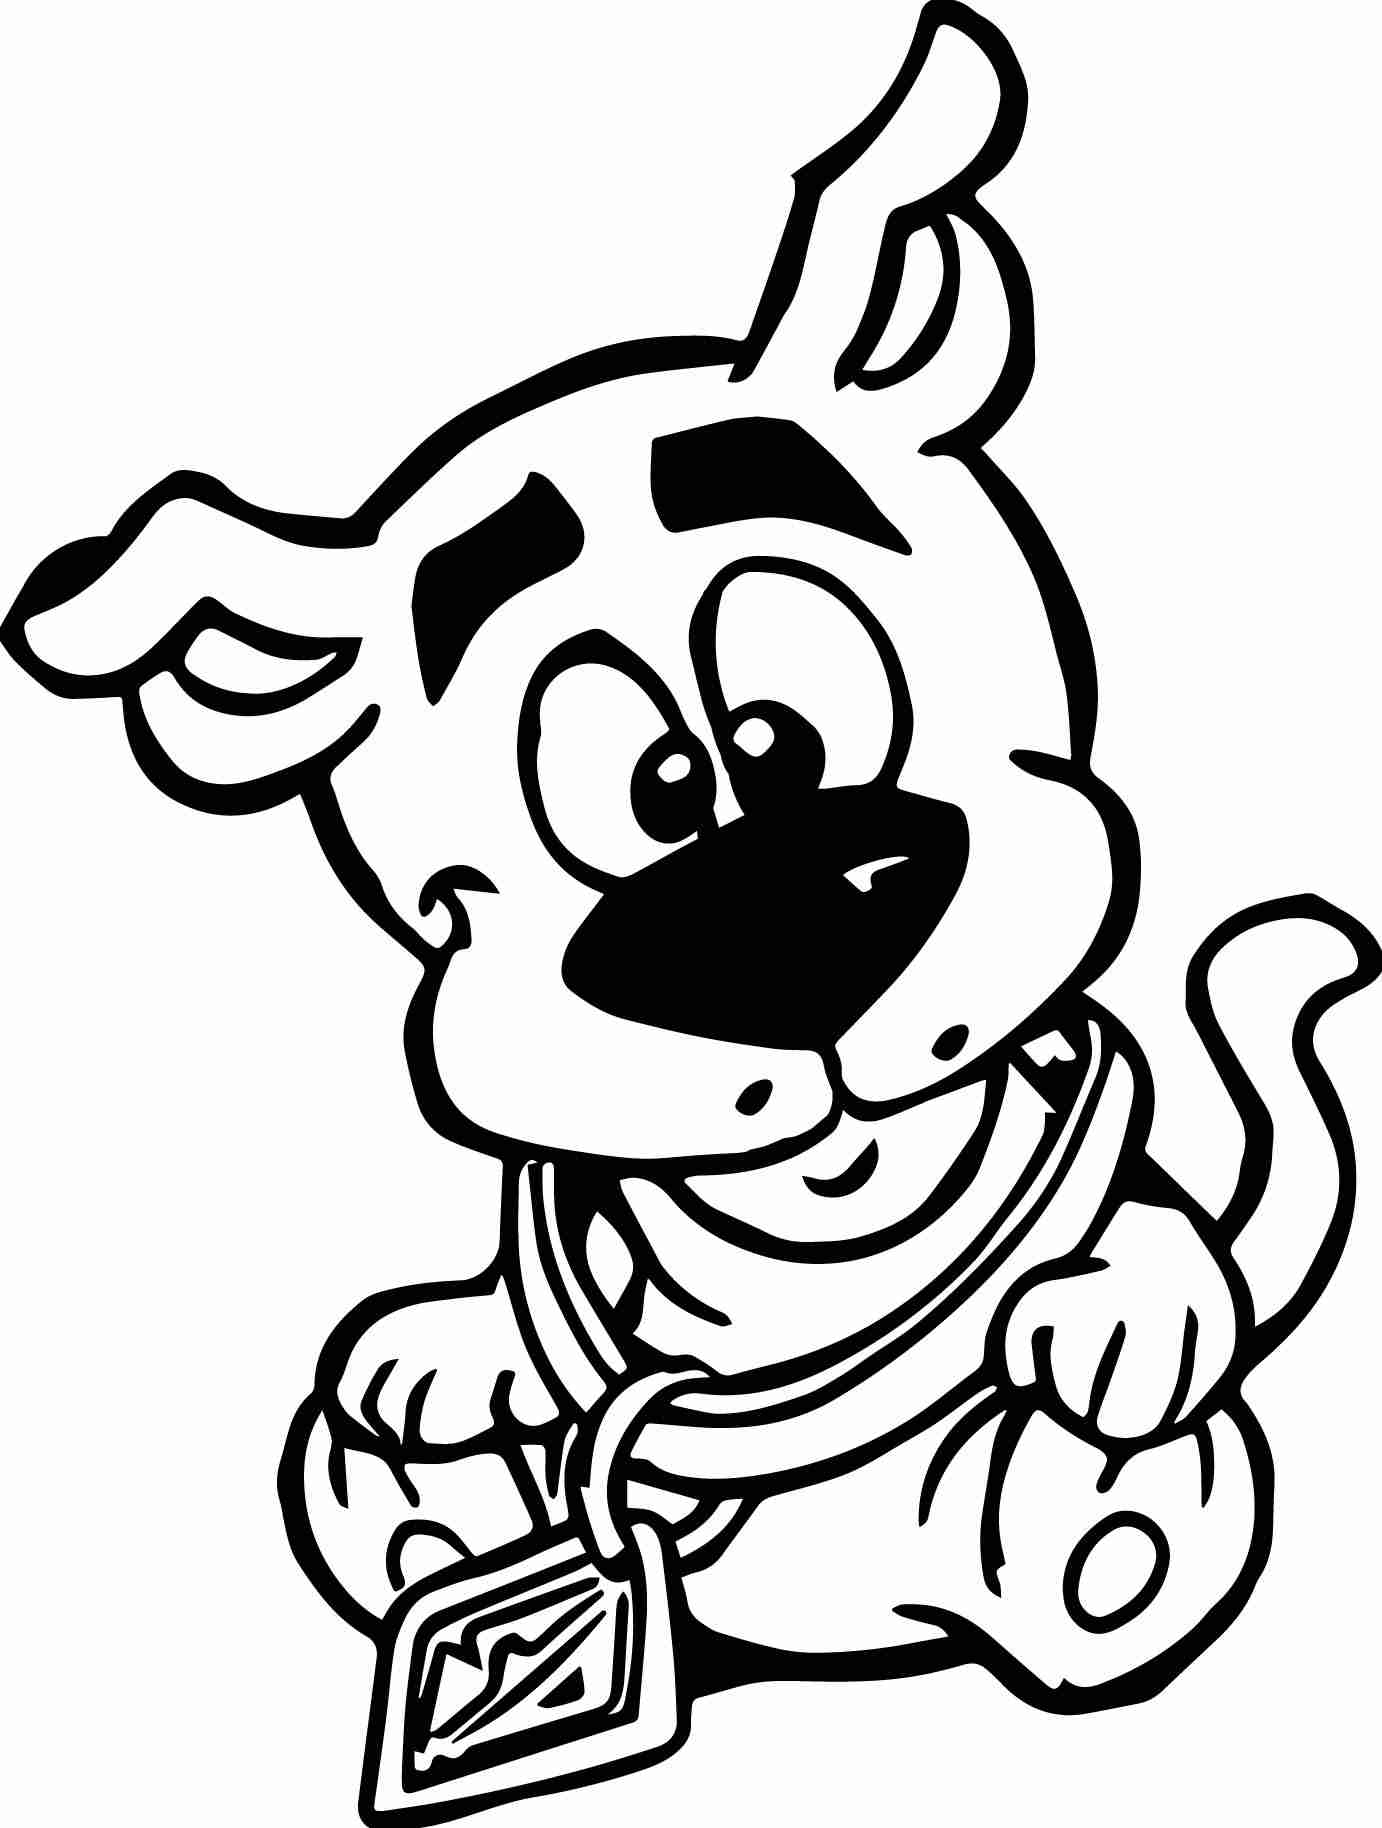 Scooby Doo Monster Coloring Pages at GetDrawings Free download